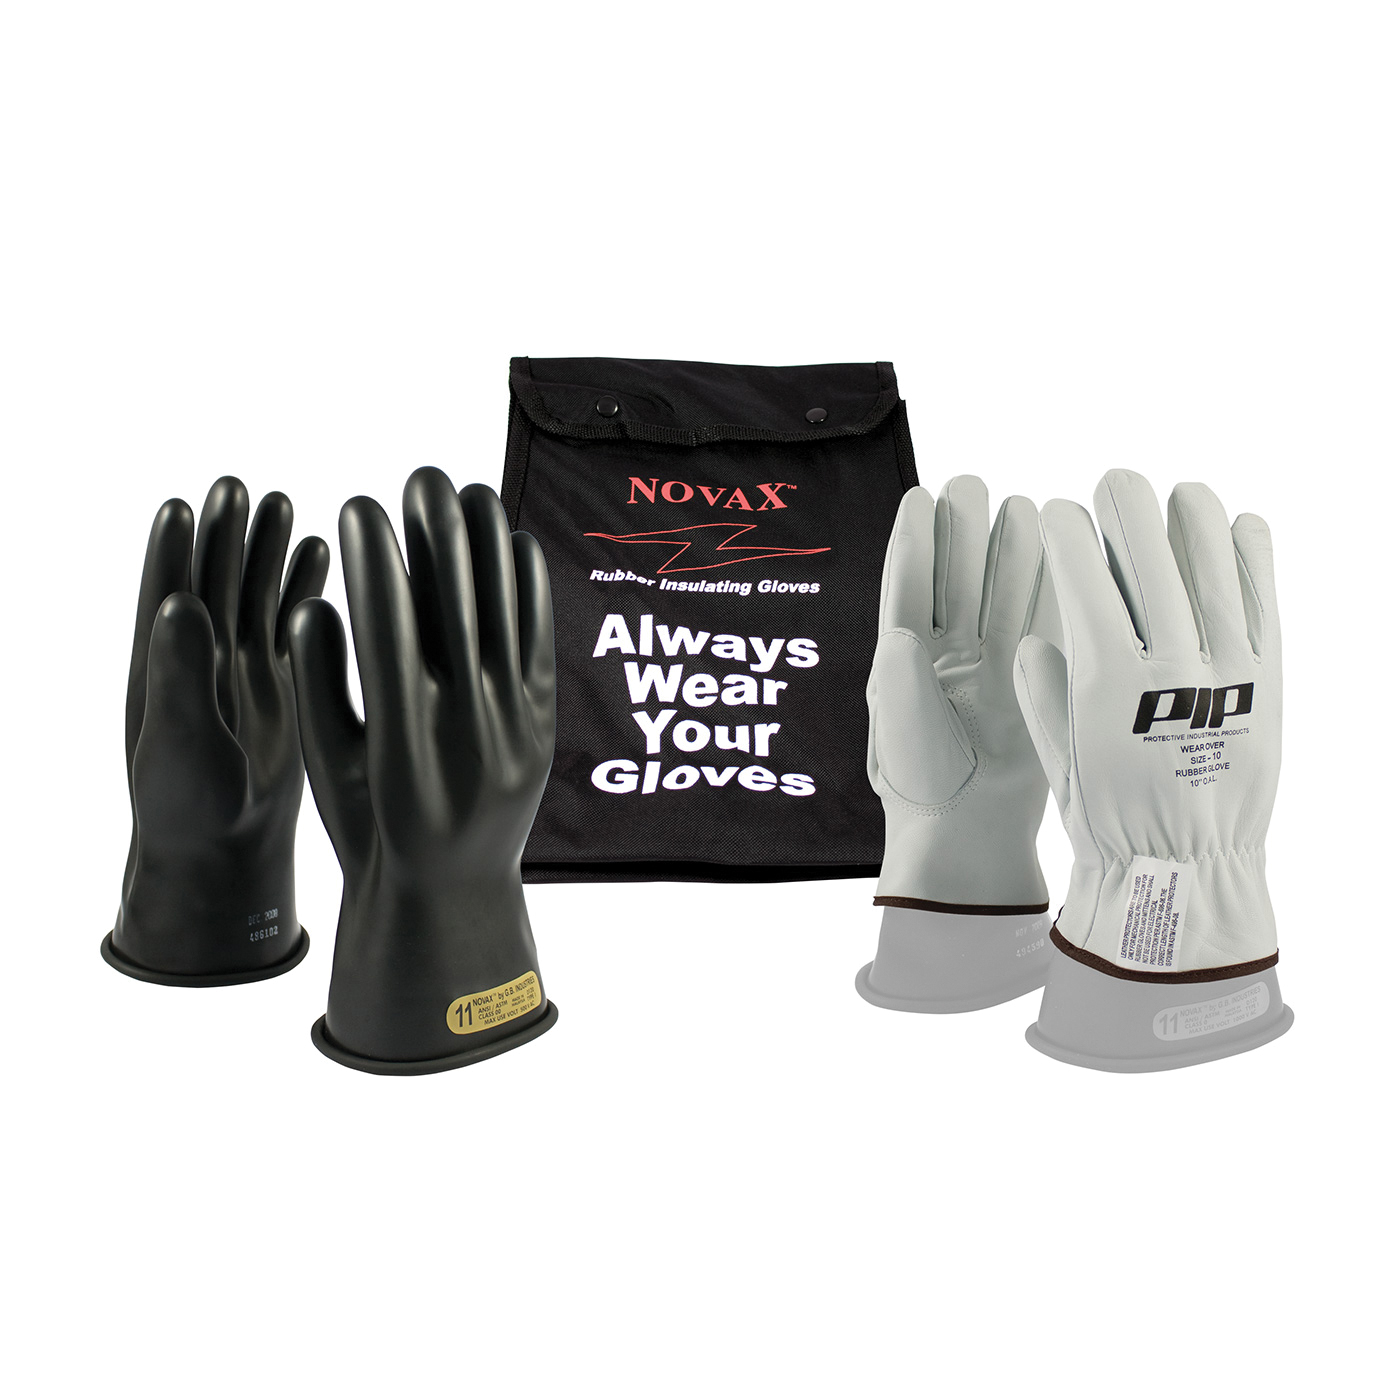 Novax® 150-SK-00/7-KIT Insulating Unisex Electrical Safety Gloves Kit, SZ 7, Goatskin Leather/Natural Rubber, Black/Natural, 11 in L, ASTM Class: Class 00, 500 VAC, 750 VDC Max Use Voltage